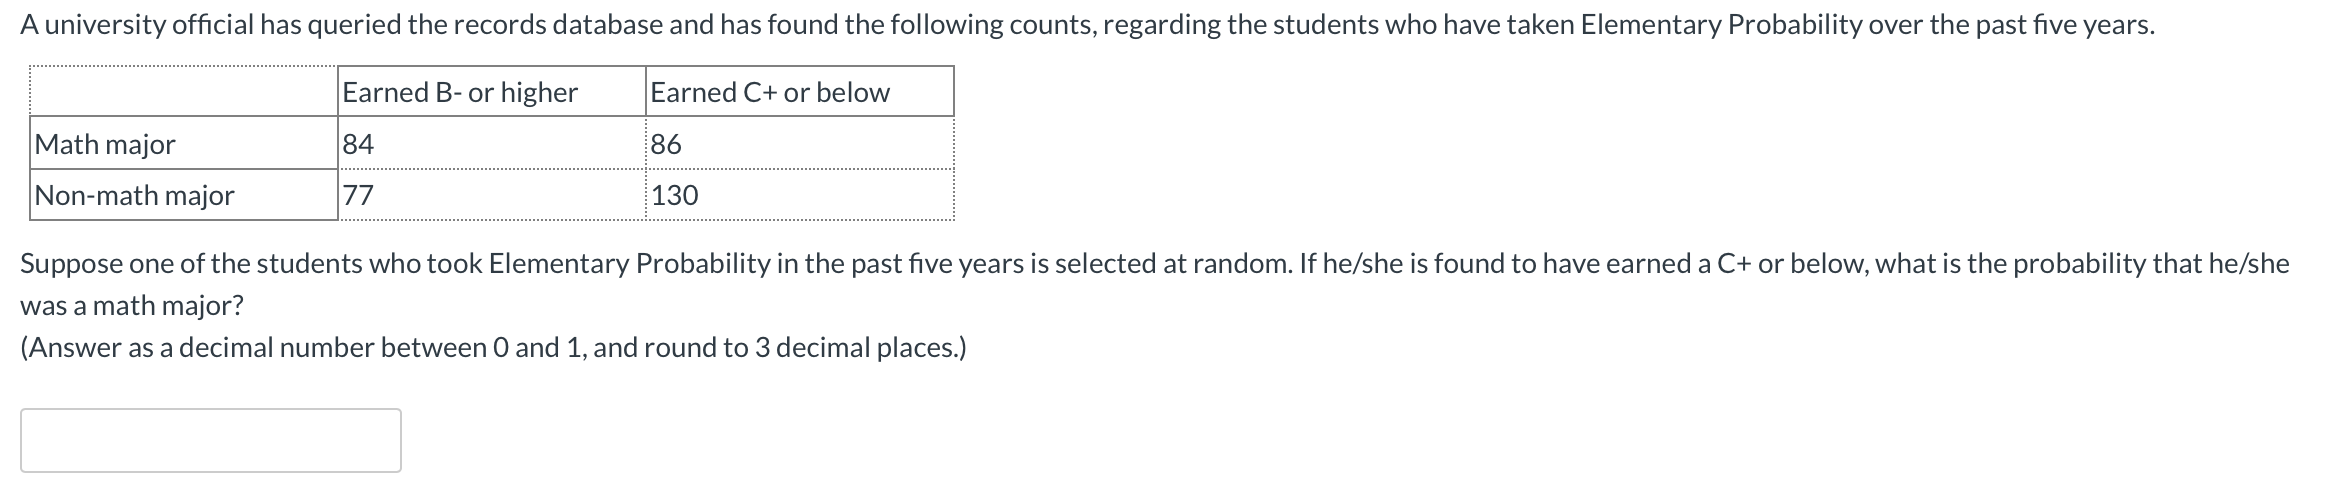 A university official has queried the records database and has found the following counts, regarding the students who have ta